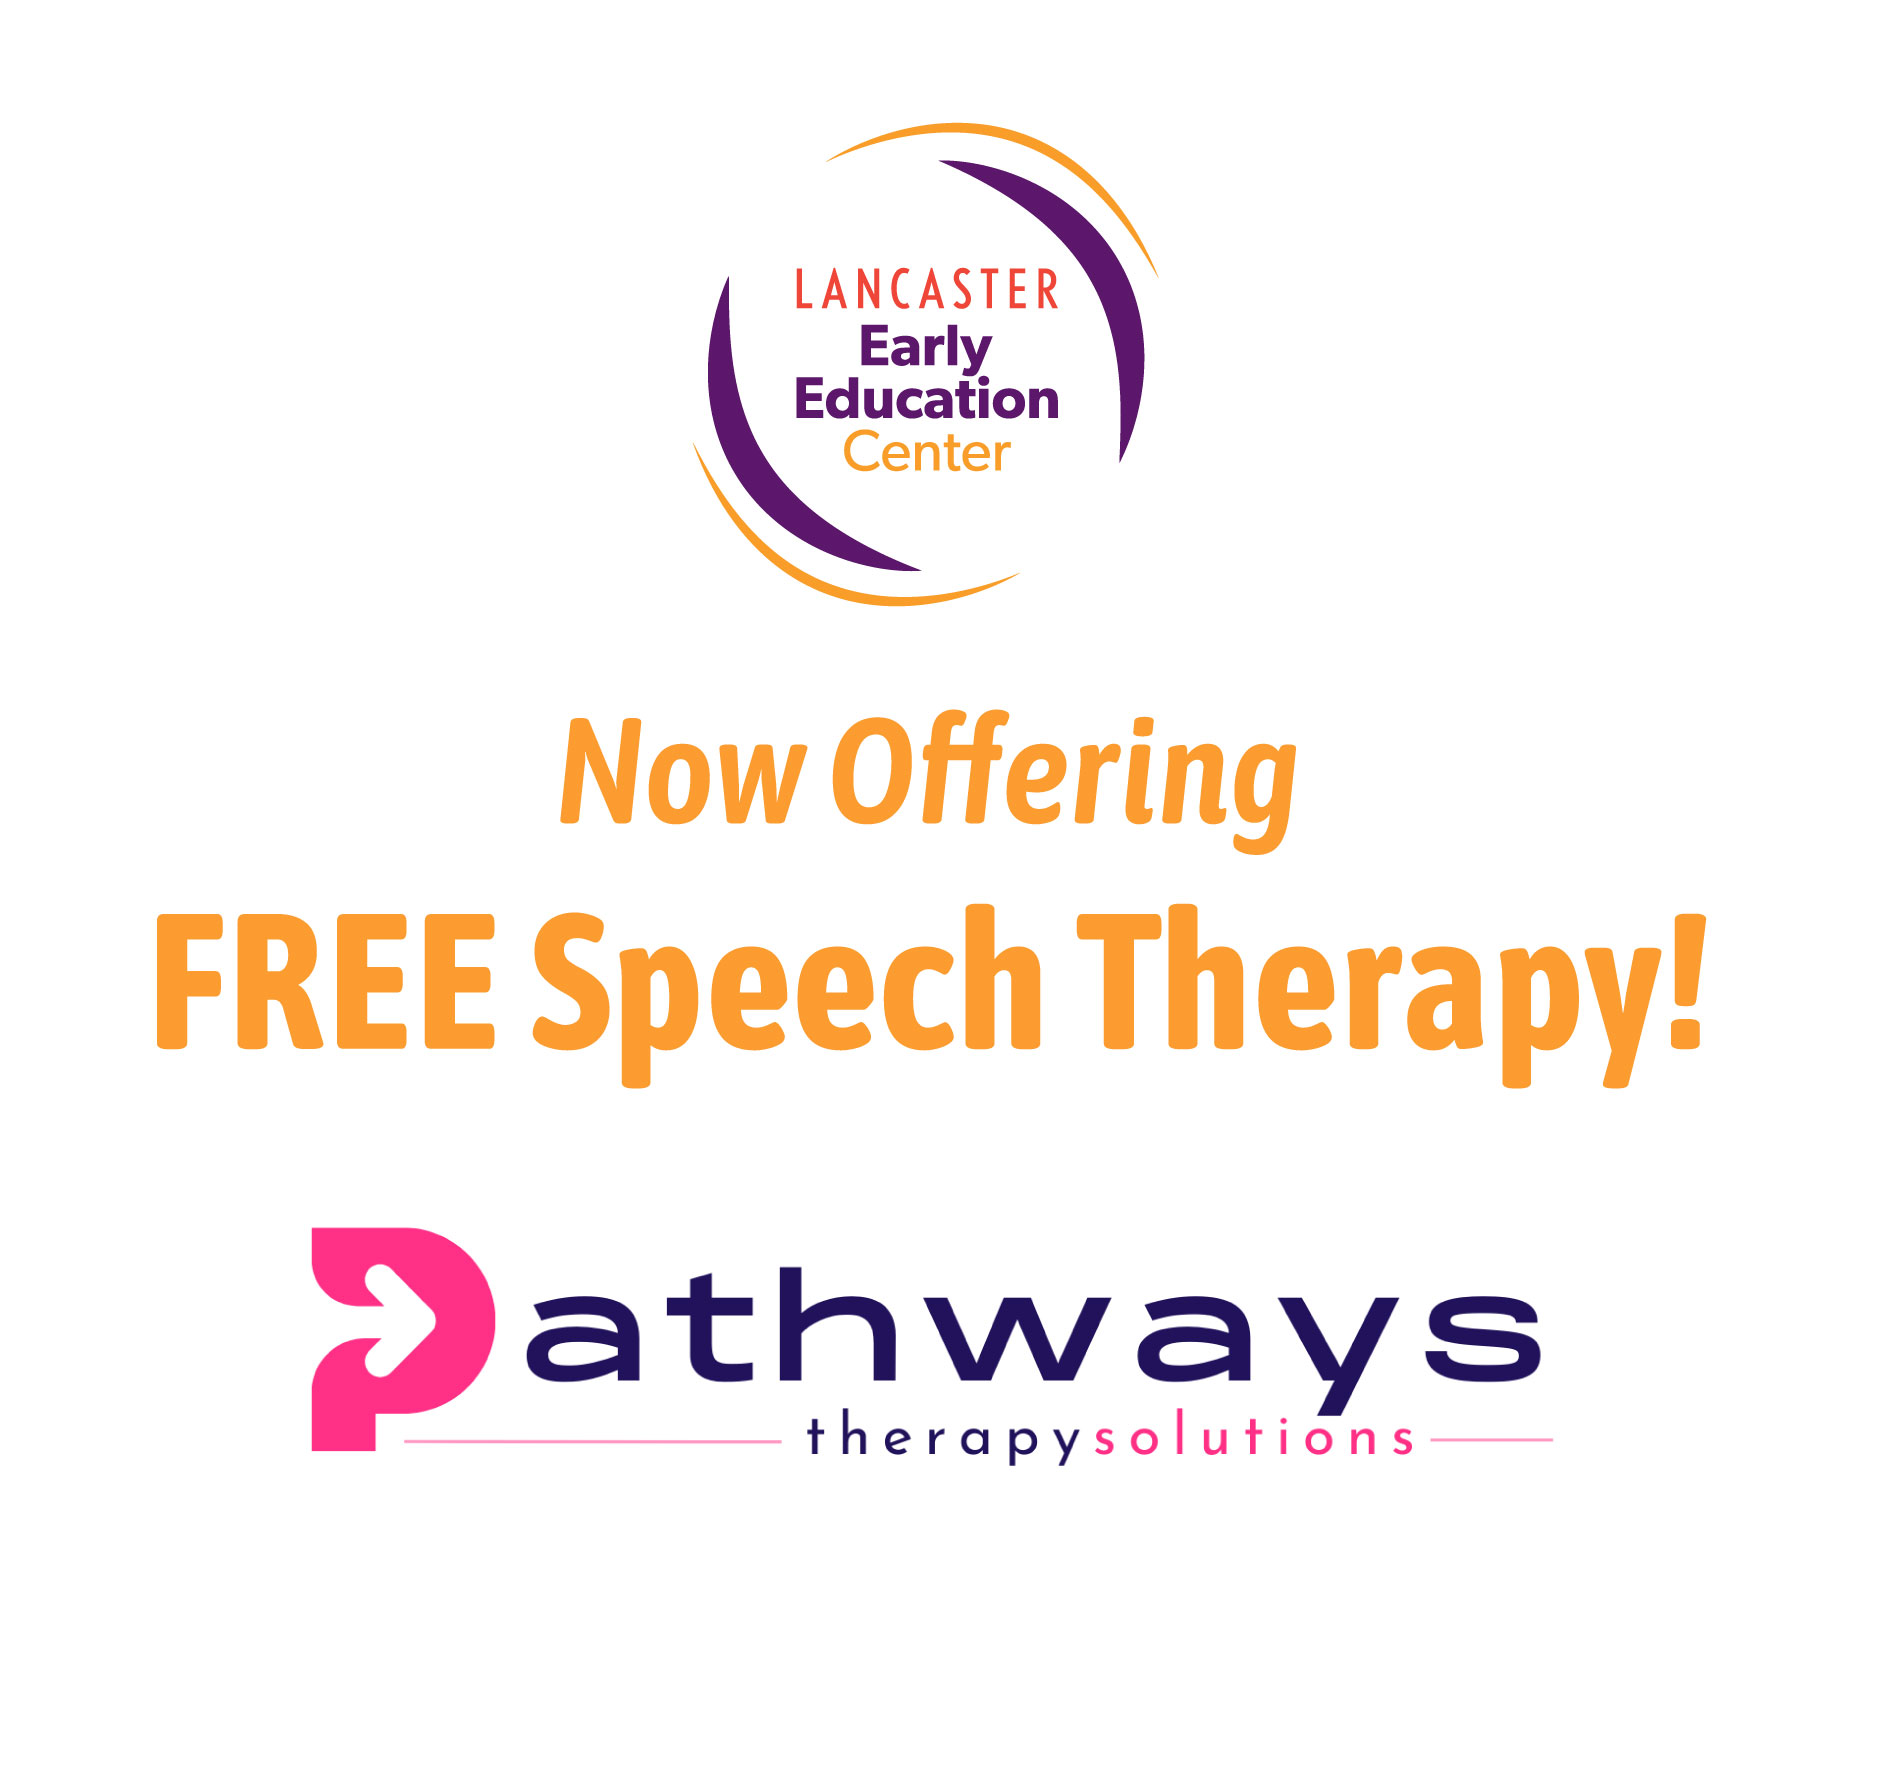 LEEC is so excited to share Lancaster Early Education Center has partnered with Pathways Therapy Solutions to provide speech therapy to all children enrolled in our program at NO COST!